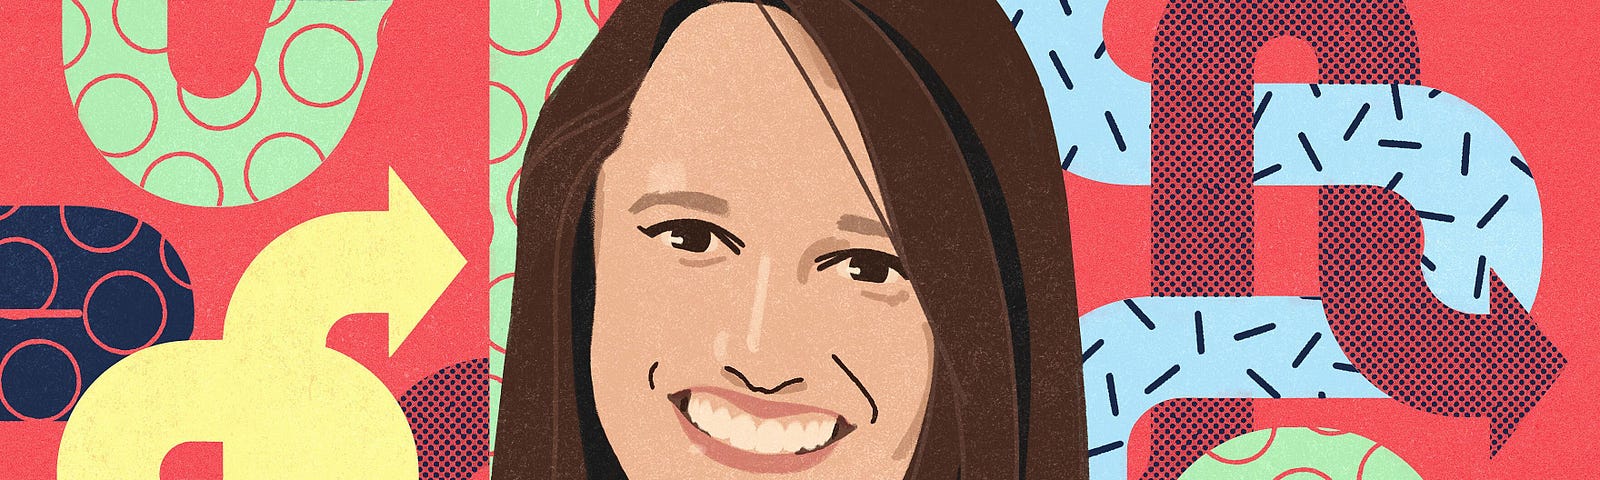 A digital illustration of a smiling white woman with long brown hair, wearing a whiteT-shirt.The background is red-orange with green, yellow, blue, and black looping, twisting, and interlocking arrows.